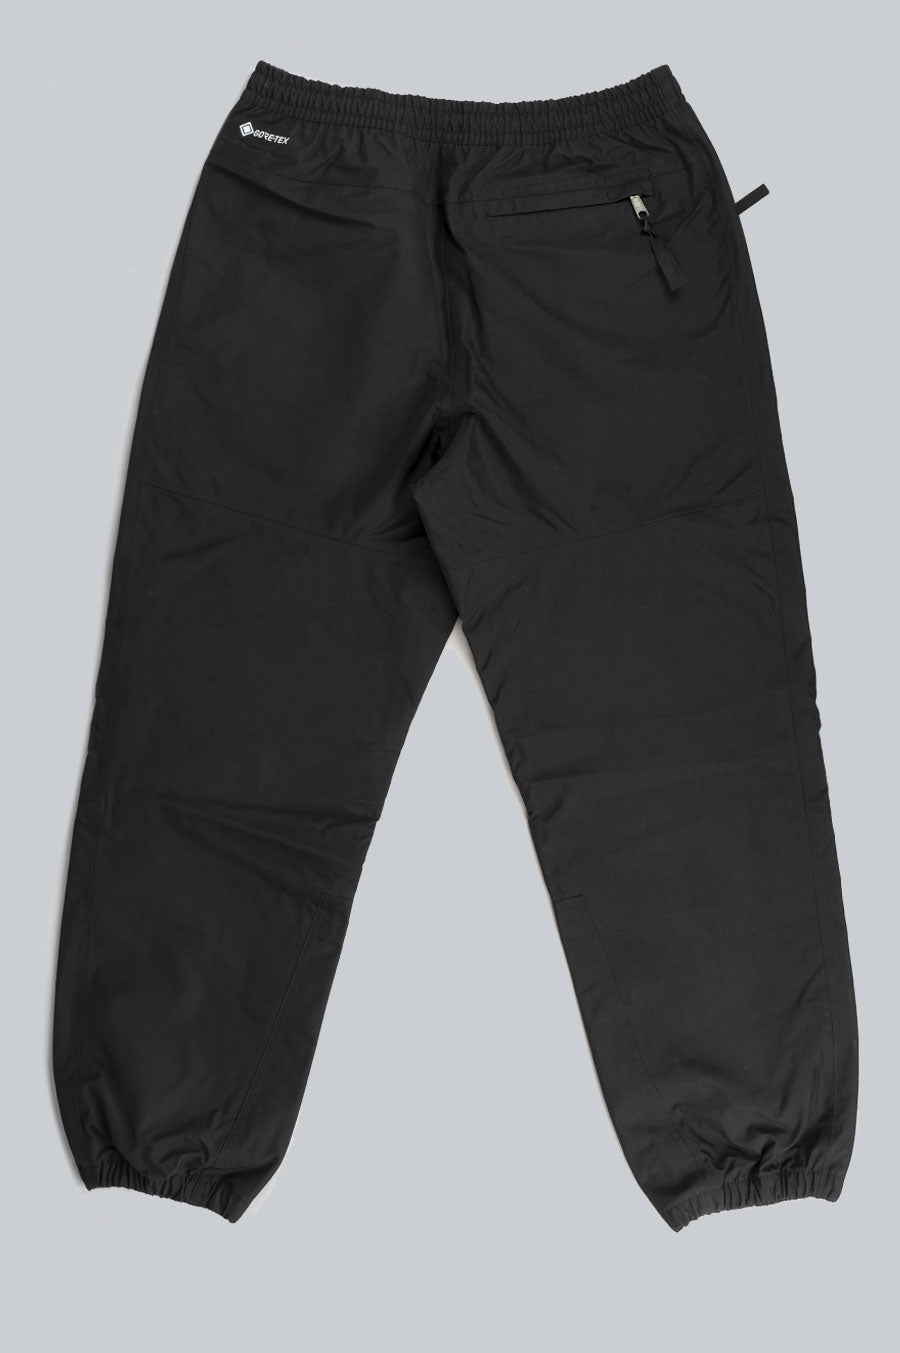 THE NORTH FACE Hiking pants MOUNTAIN in black